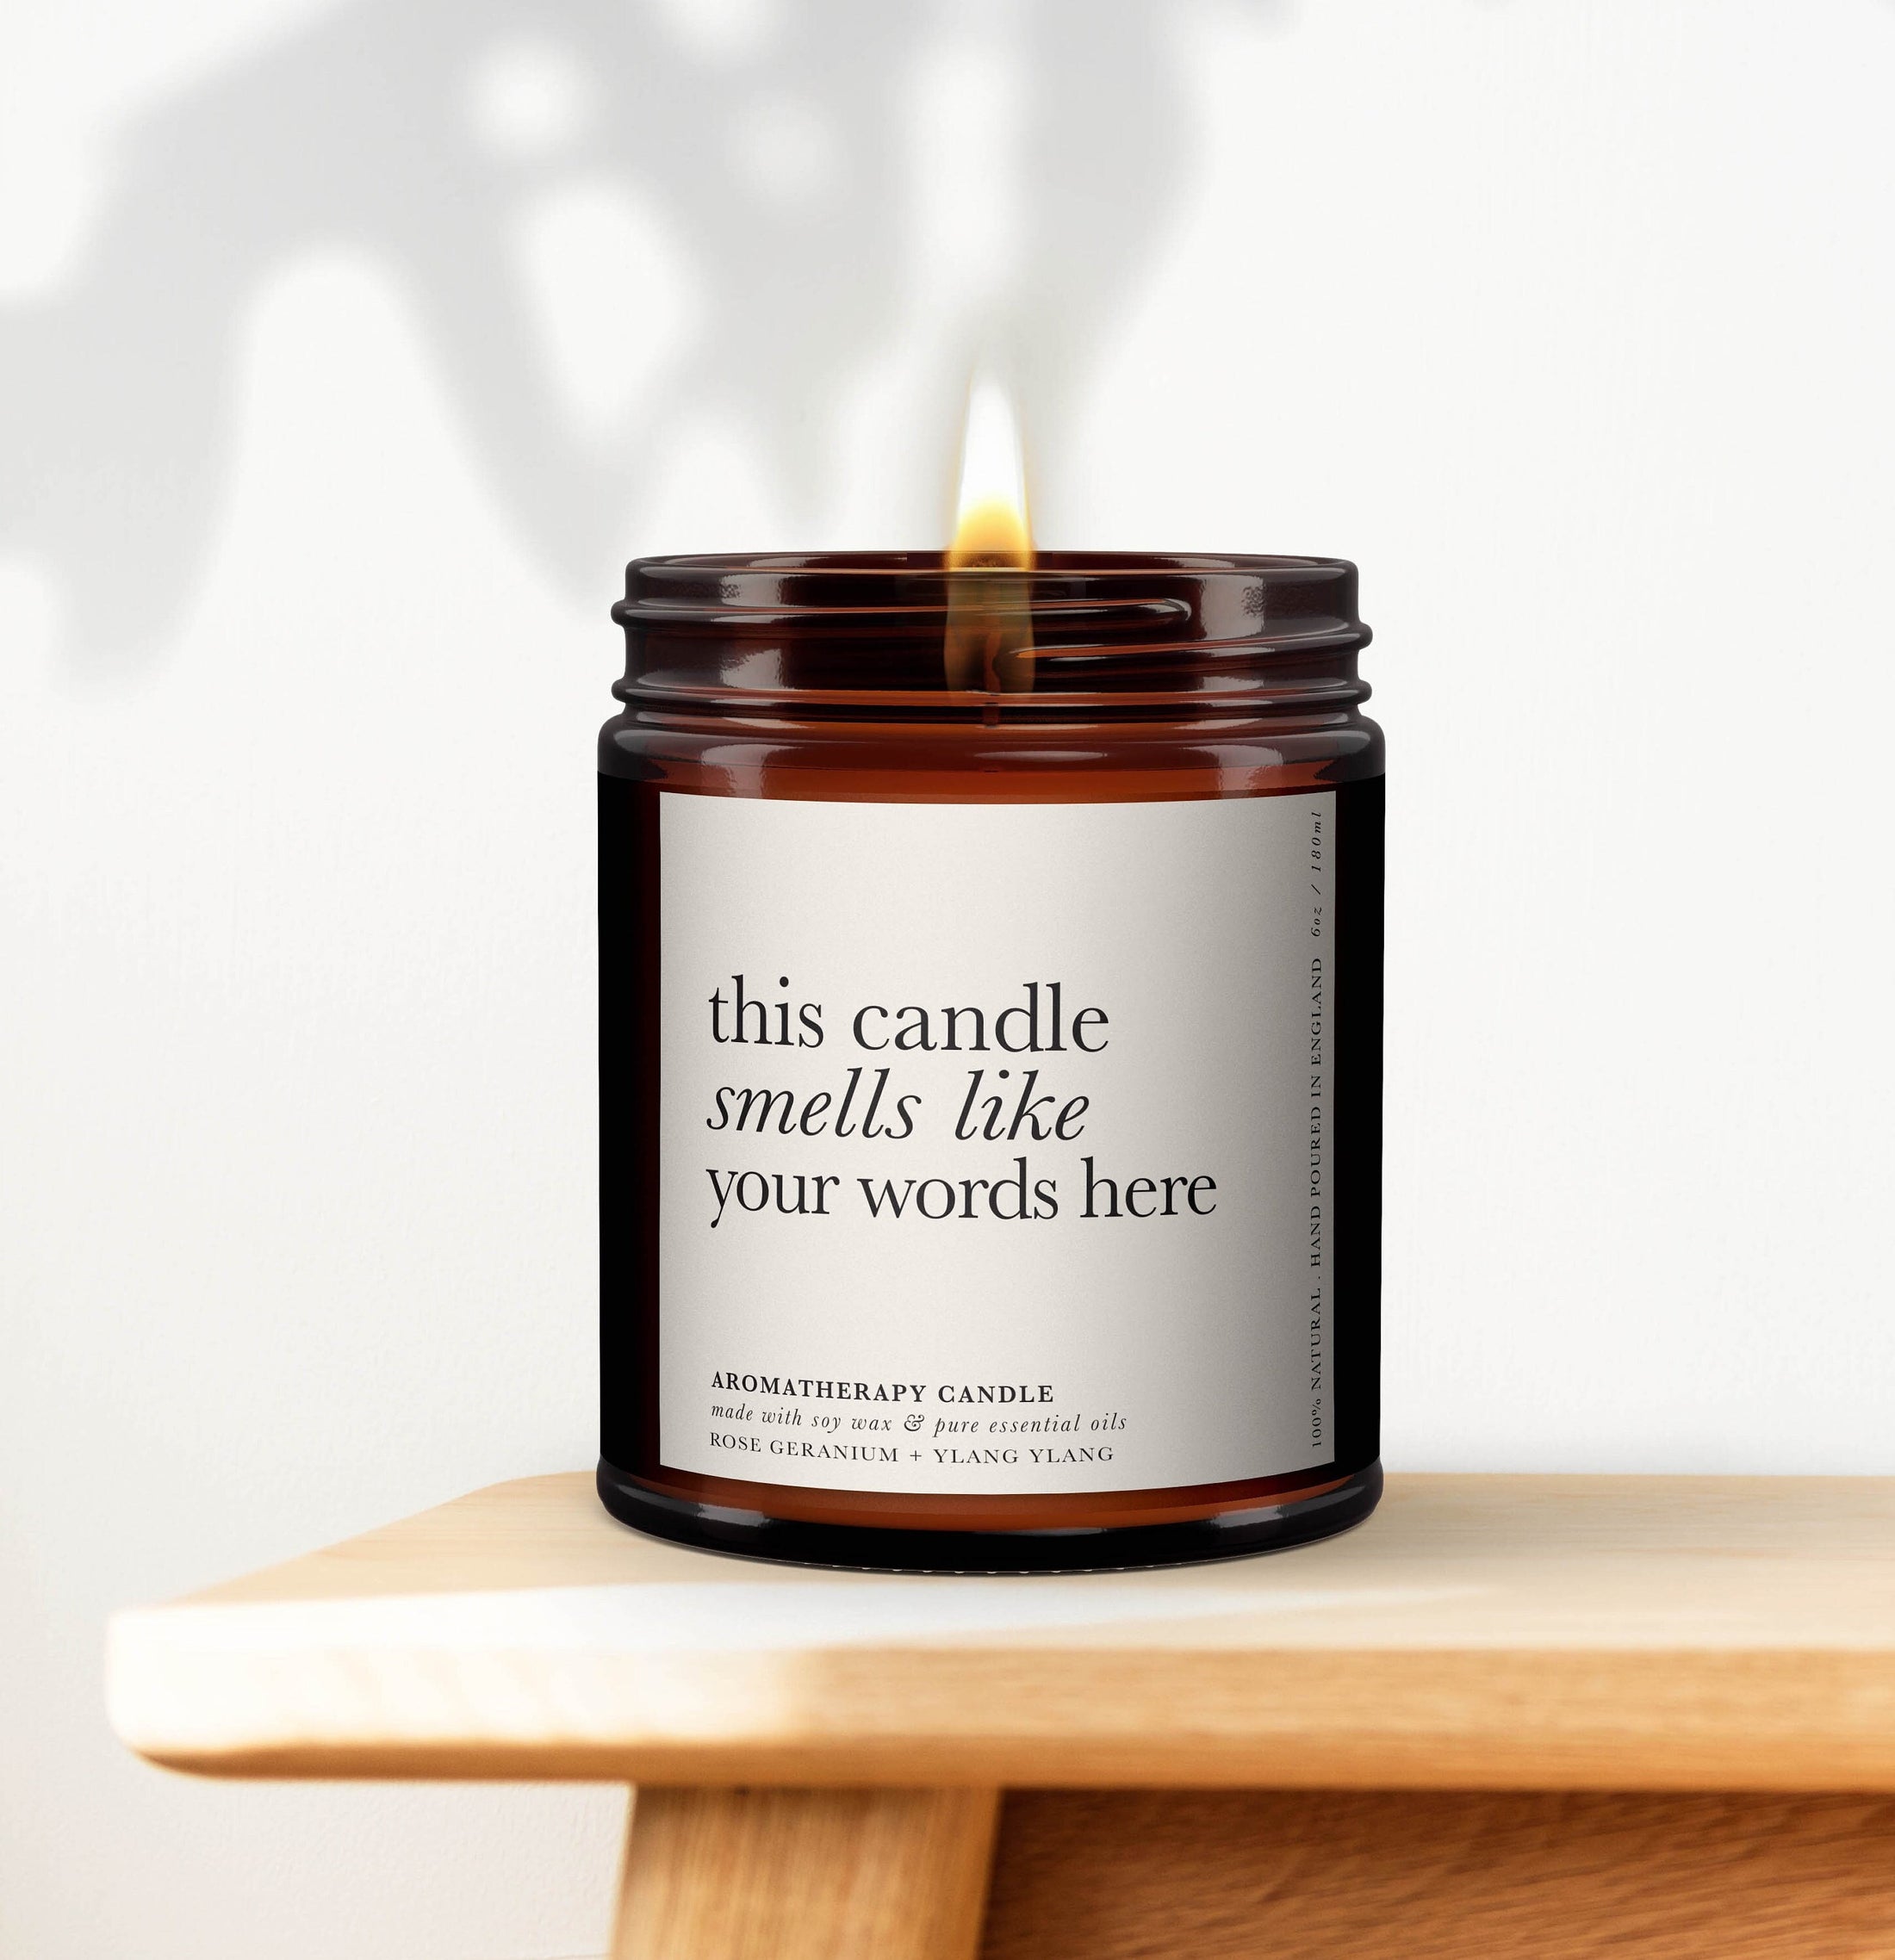 This candle smells like, Personalised Candle Gift, Custom Gifts, Personalised Candles, Christmas Gift, Smells like, Design own candle